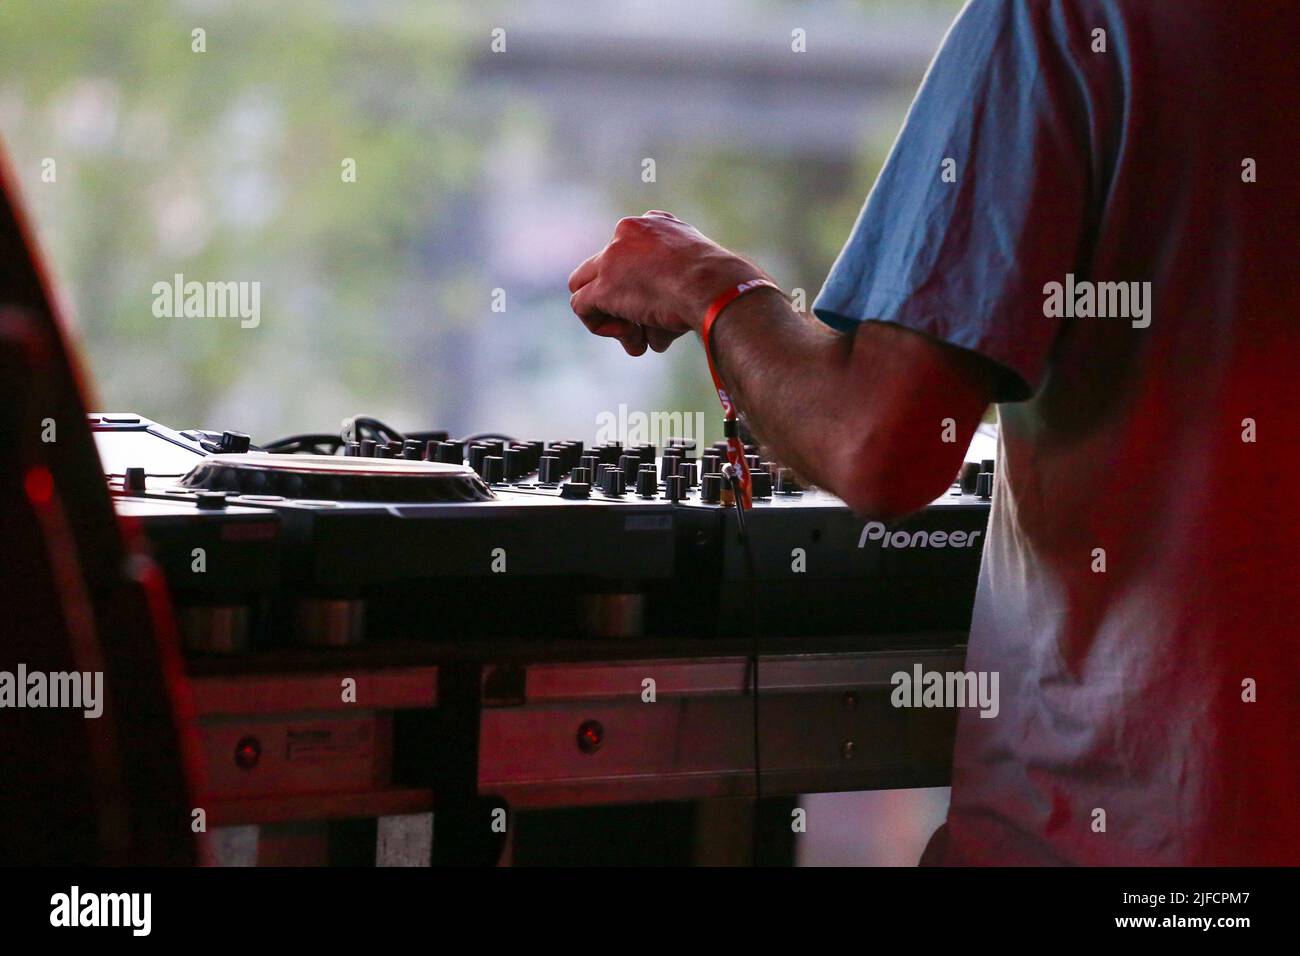 Turin, Italy. 01st July, 2022. TURIN, ITALY - 01 JULY 2022. A dj during the Kappa FuturFestival 2022 on 01 July 2022 at Parco Dora in Turin, Italy. The electronic music festival with artists from all over the world will take place over three days from 1 to 3 July.. Credit: Massimiliano Ferraro/Medialys Images/Alamy Live News Credit: Medialys Images by Massimiliano Ferraro/Alamy Live News Stock Photo